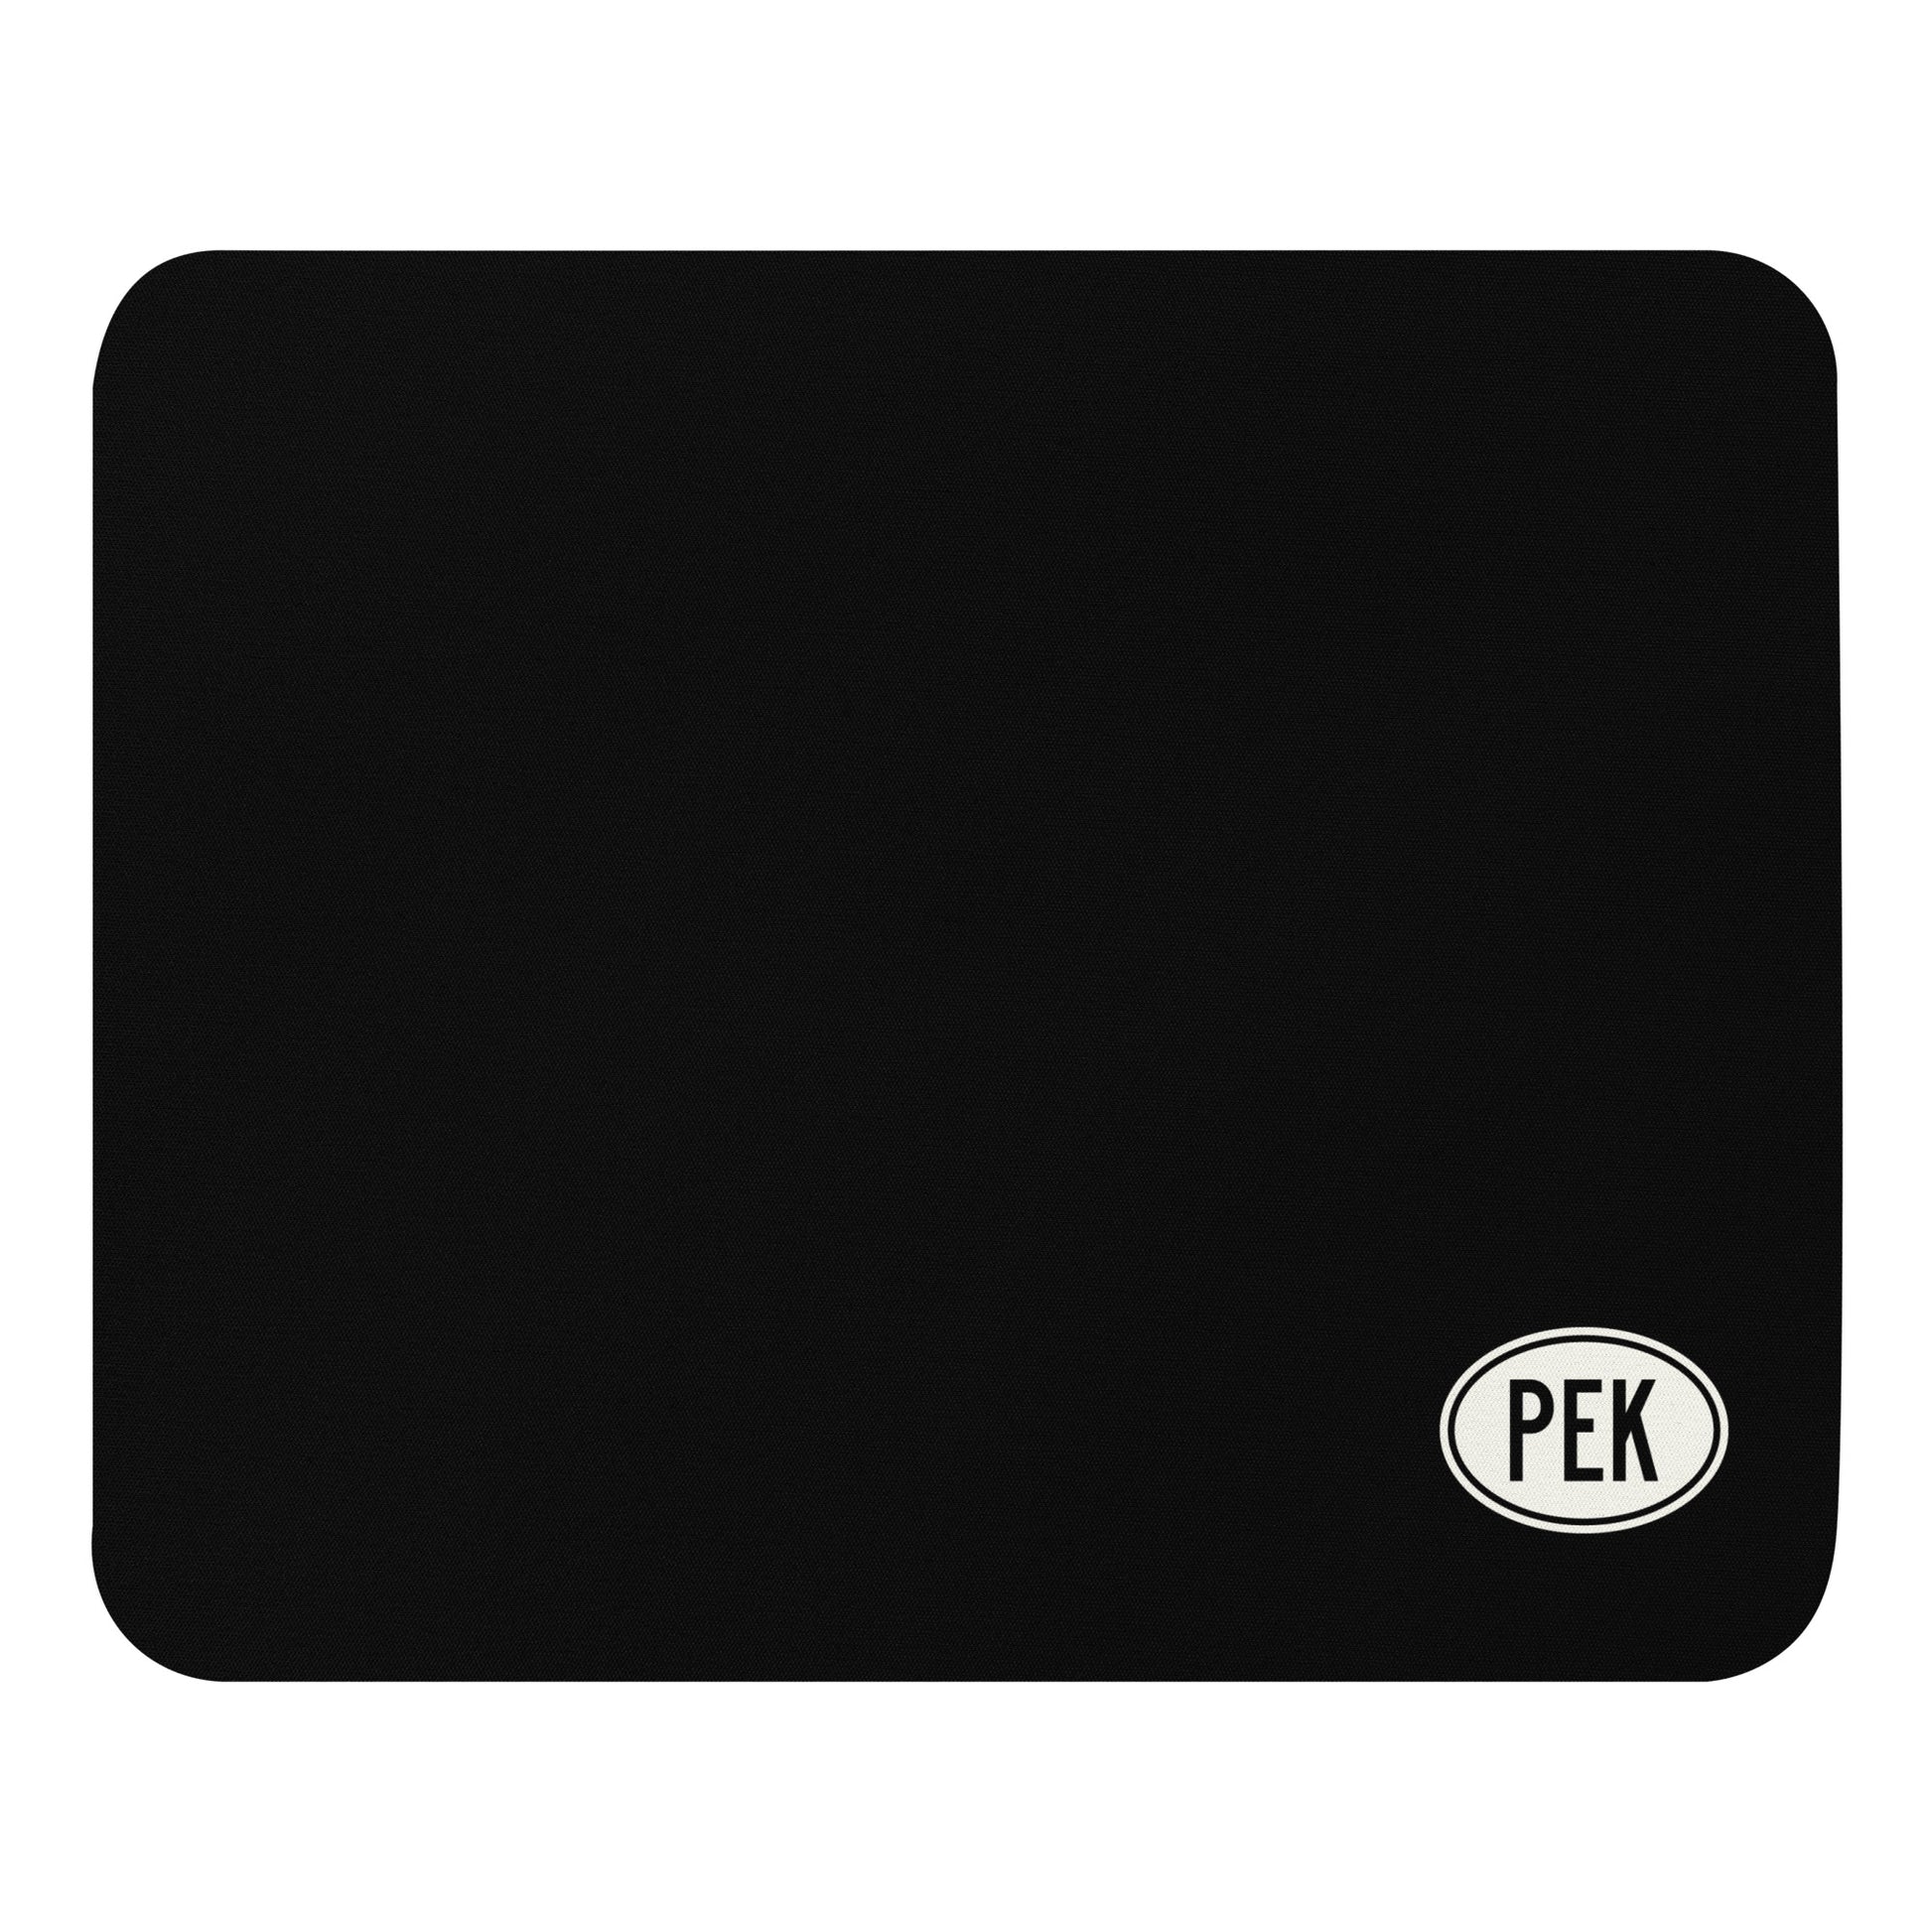 Unique Travel Gift Mouse Pad - White Oval • PEK Beijing • YHM Designs - Image 01